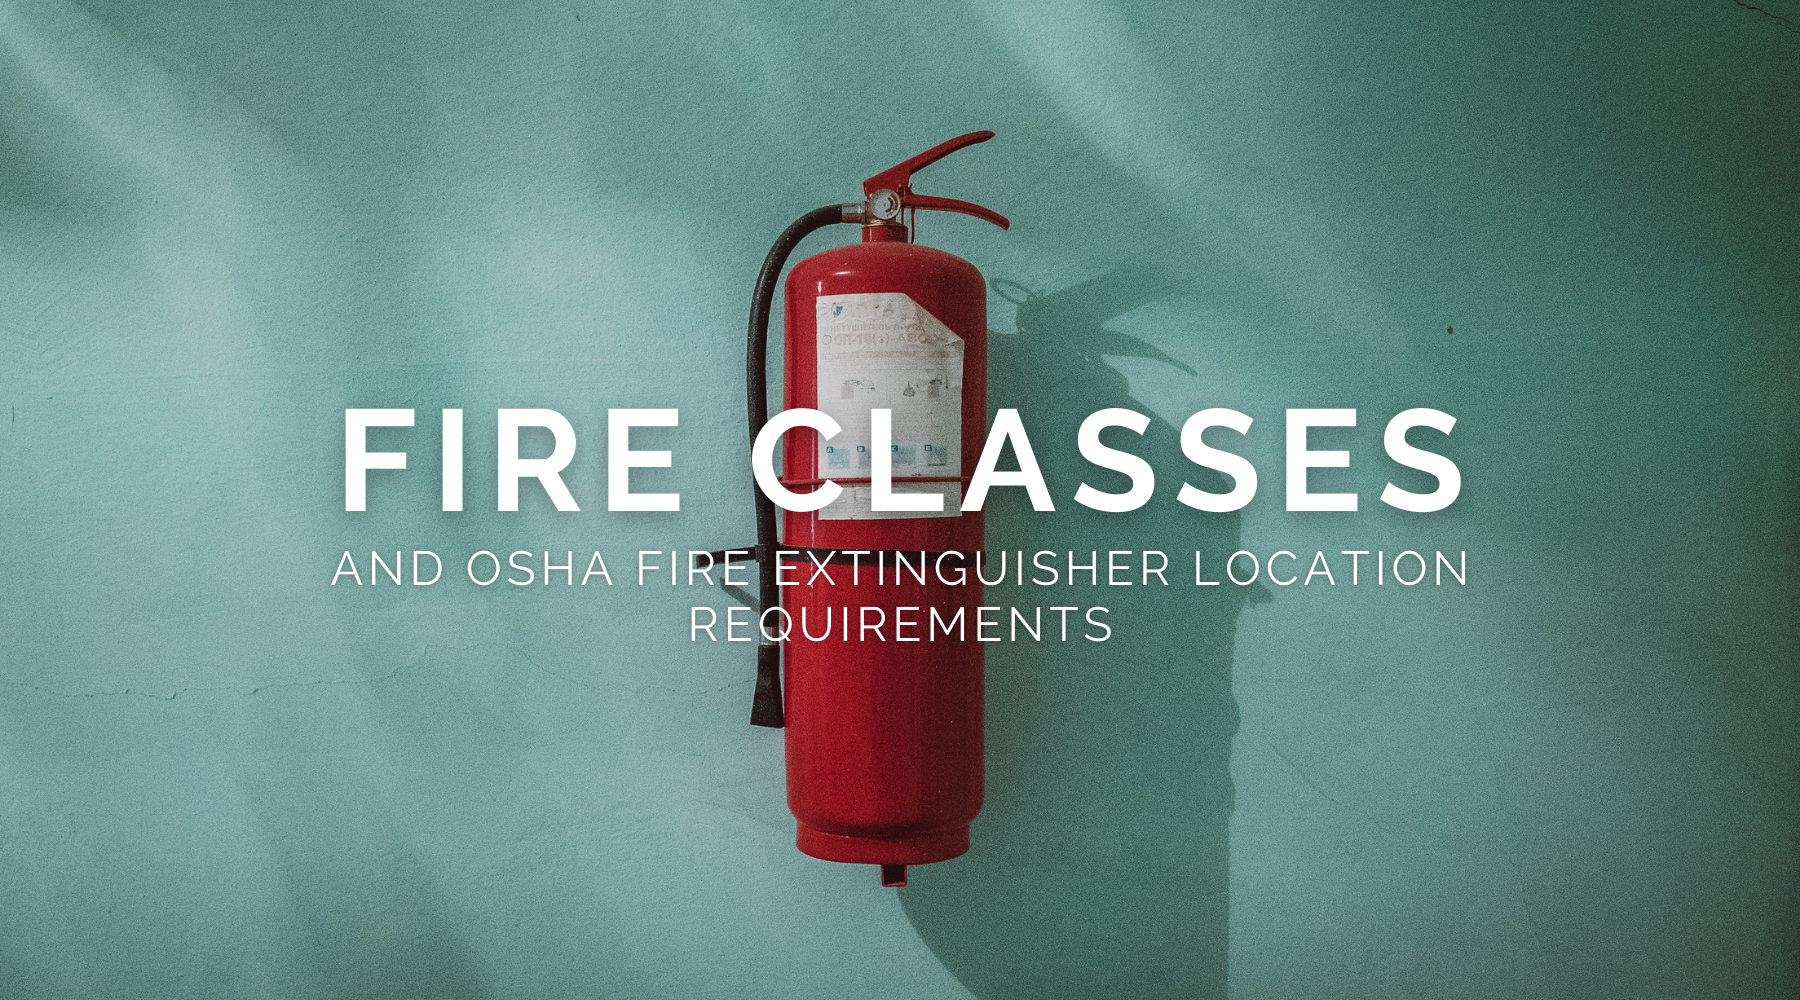 Fire Classes and Fire Extinguisher Location Requirements